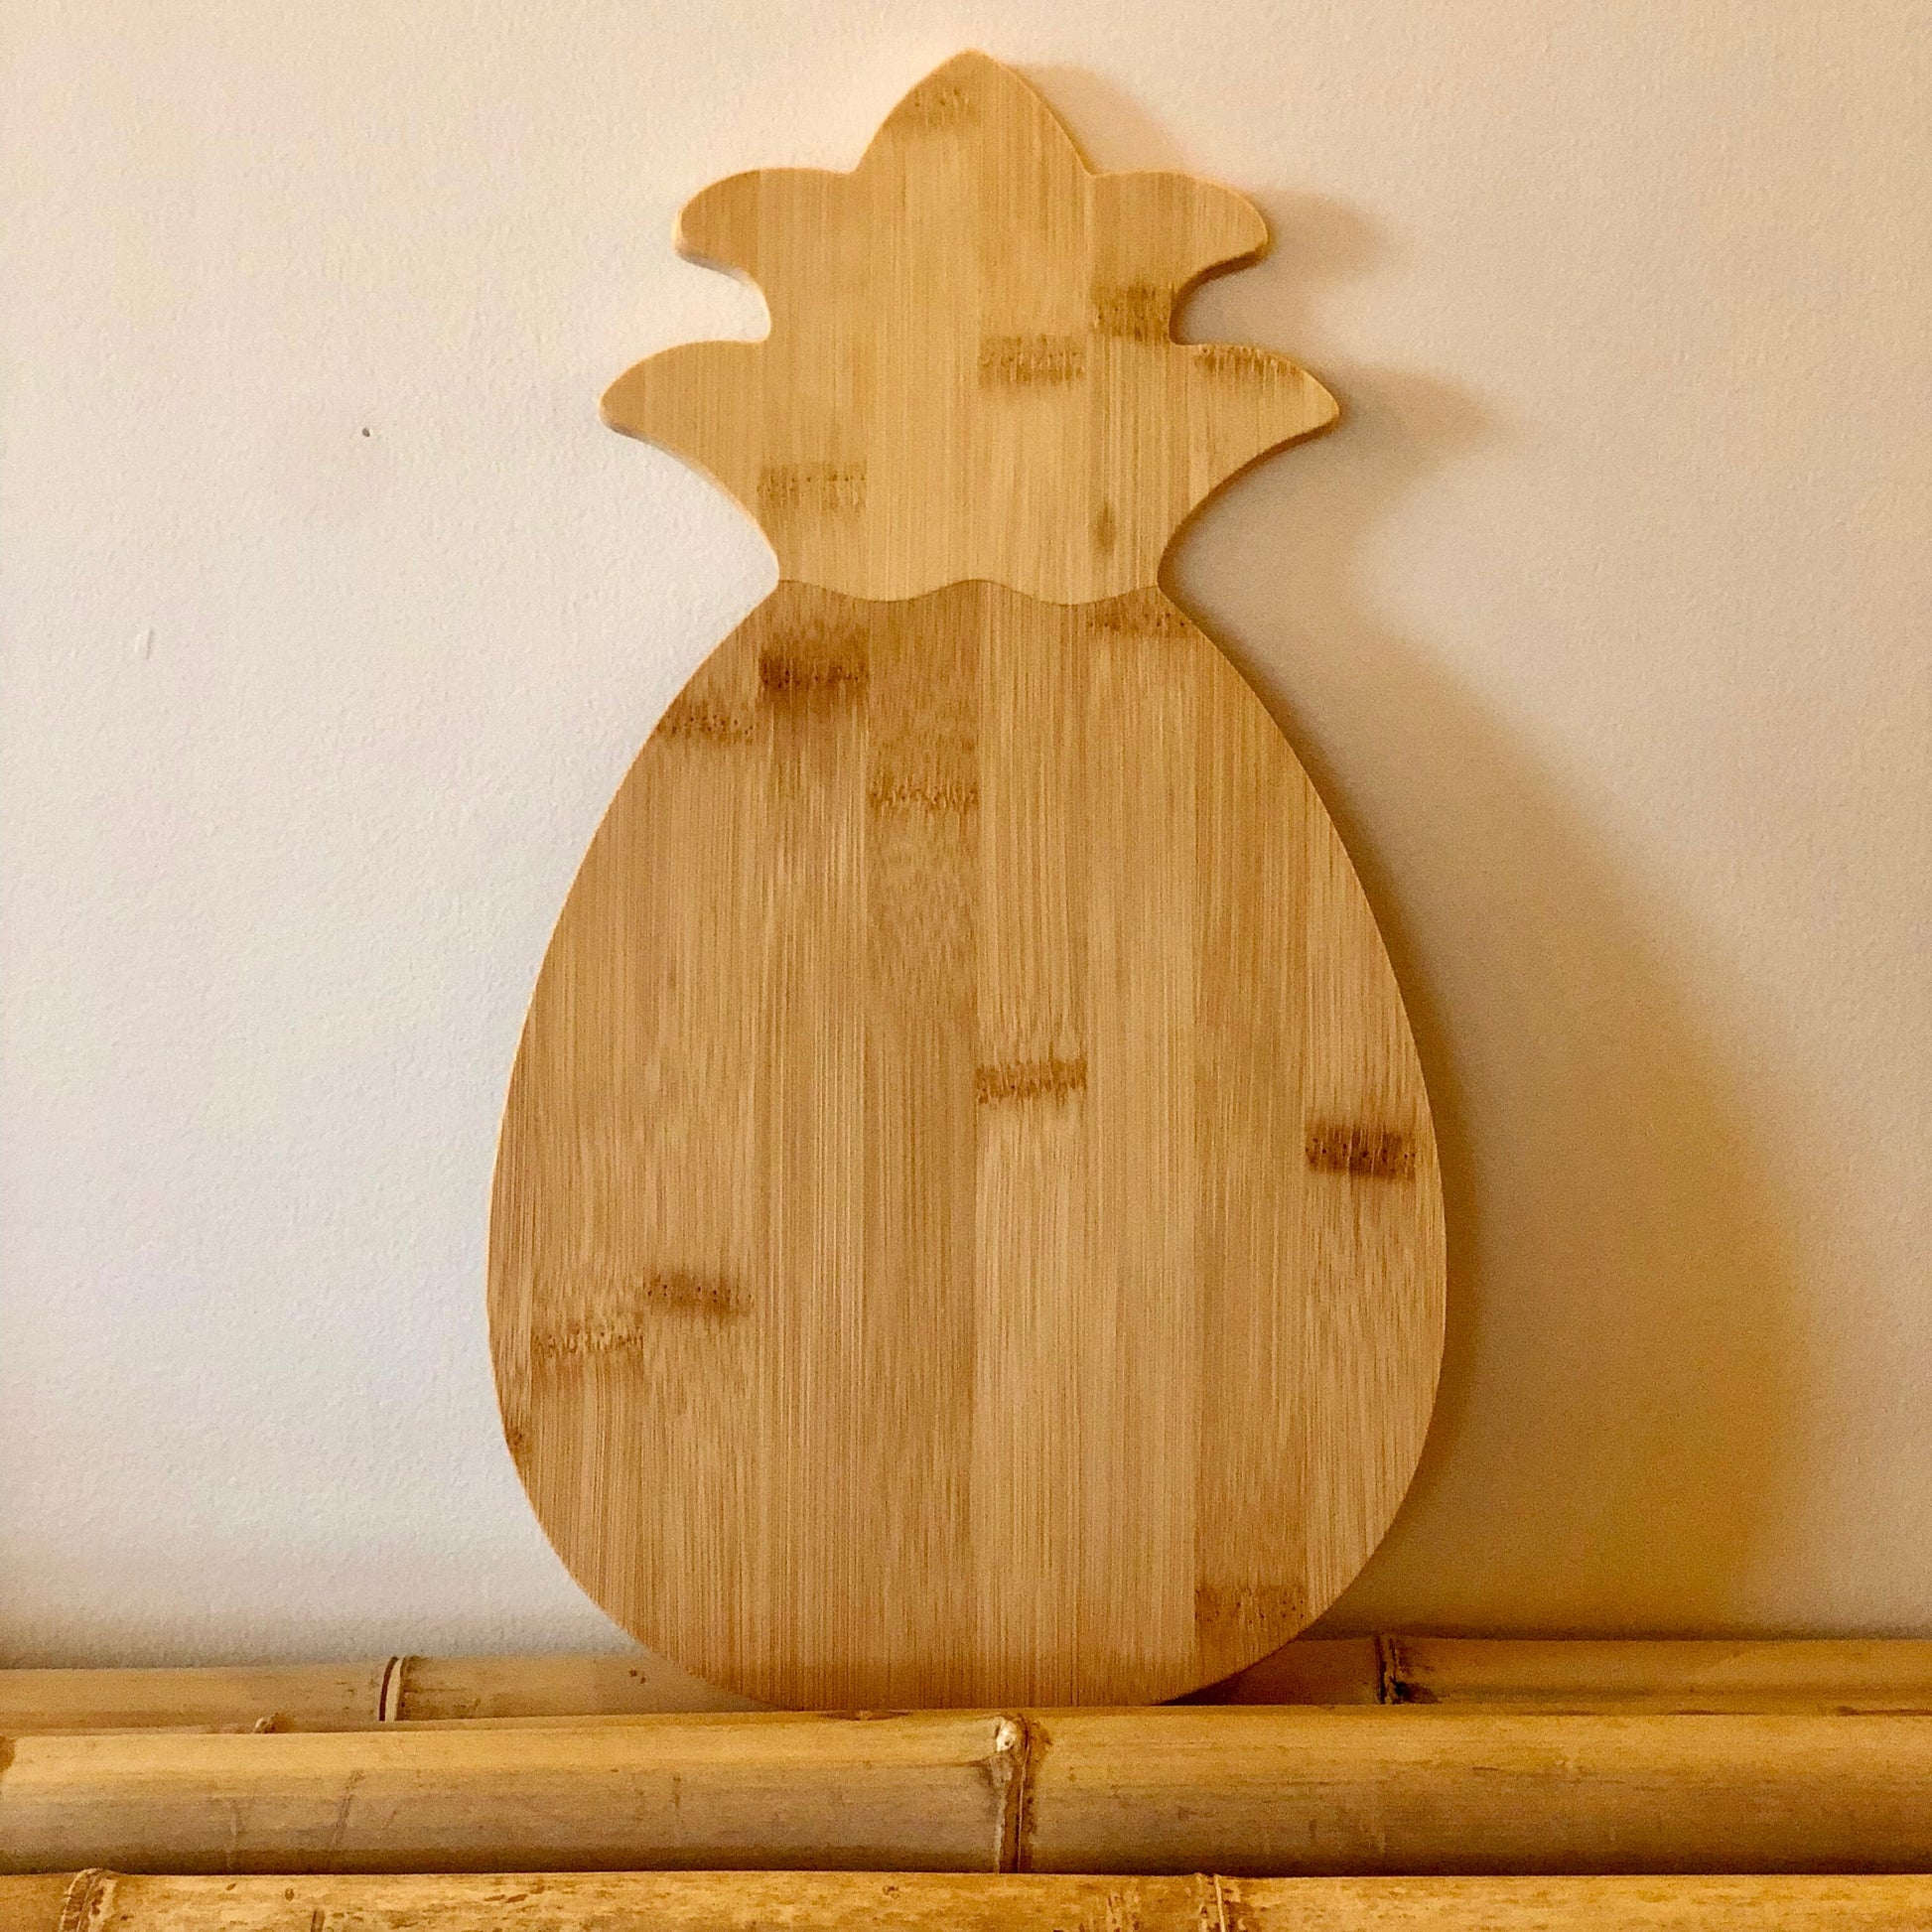 sustainable, zero waste, earth-friendly, plastic-free Pineapple Cutting Board - Bamboo Switch